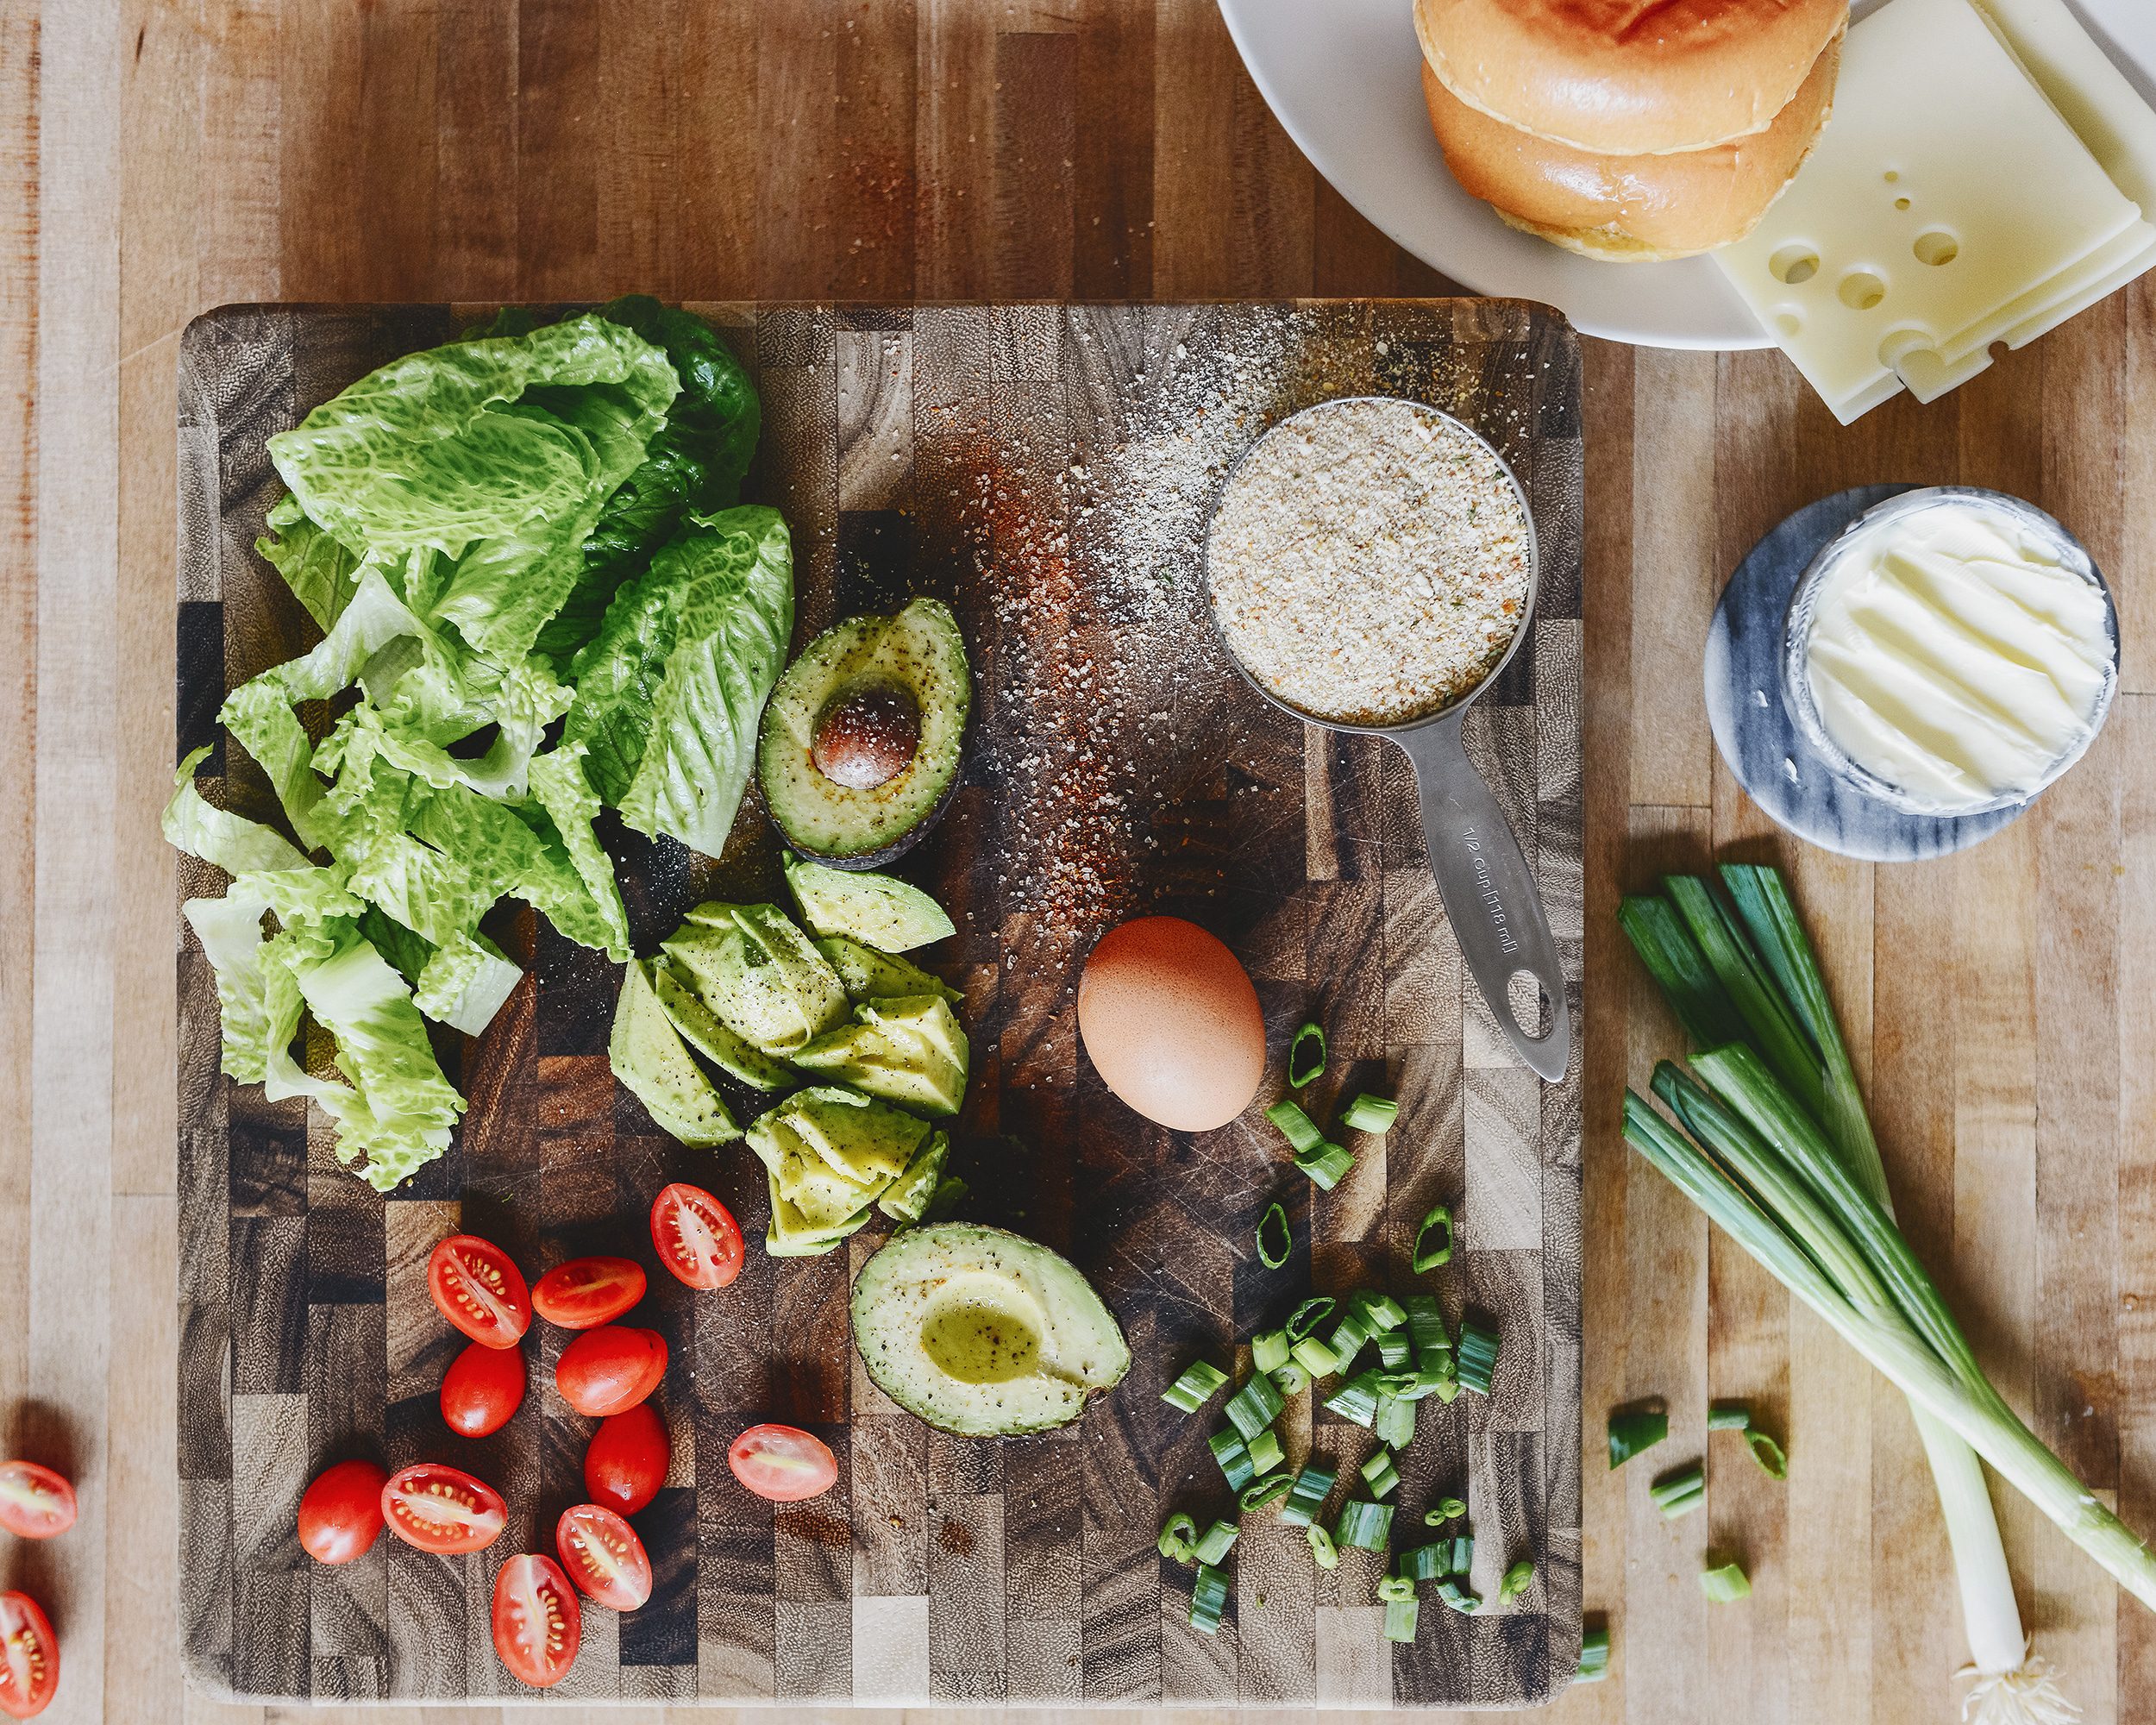 Turkey burger ingredients are laid out on a butcher block countertop // via yellow brick home